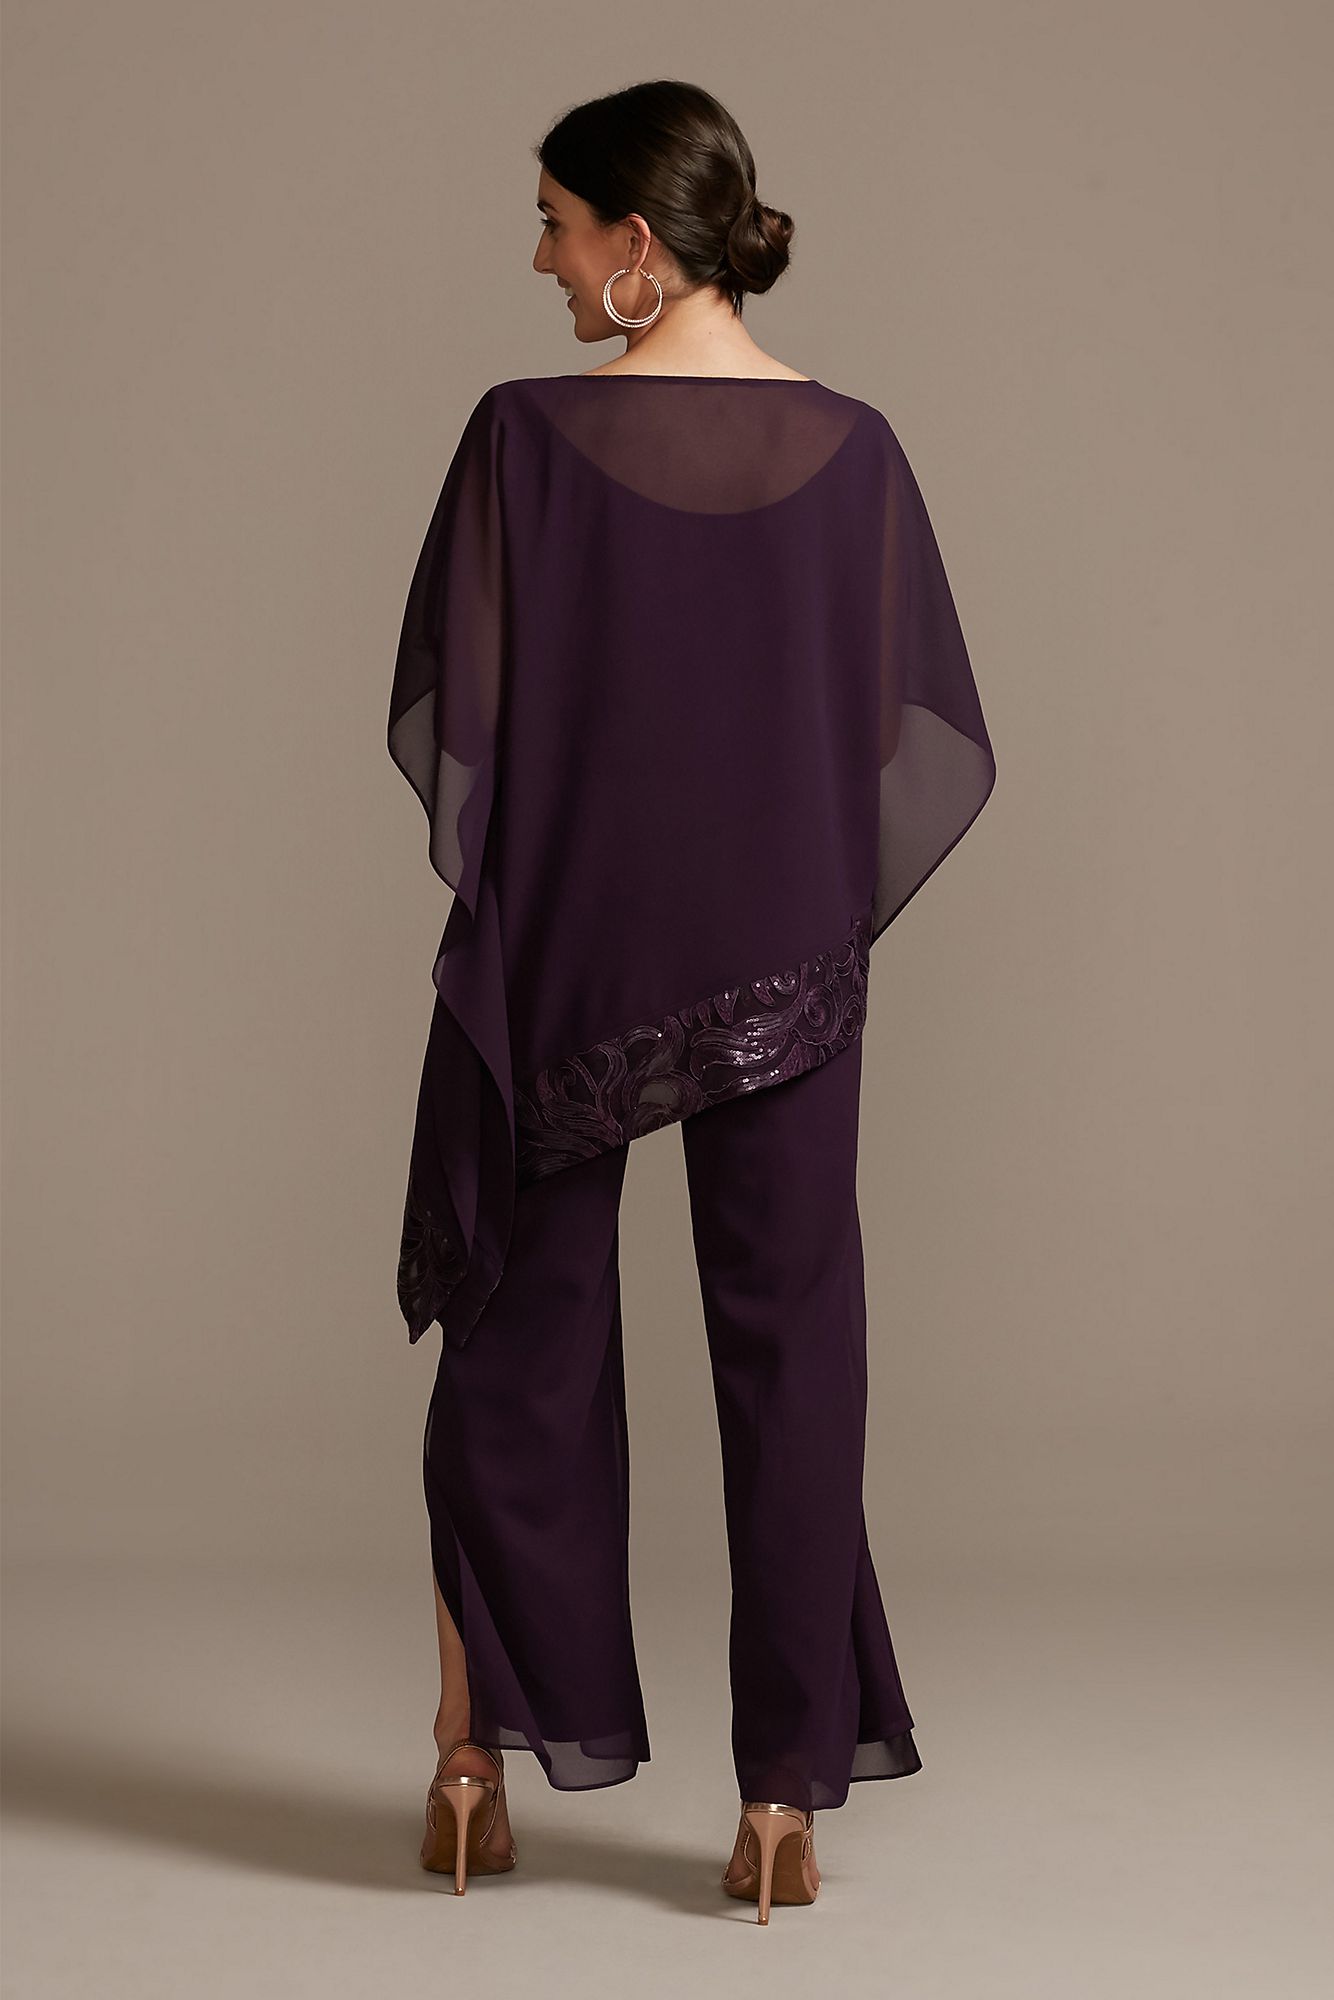 Asymmetric Chiffon and Embroidery Pant Suit Set 28536